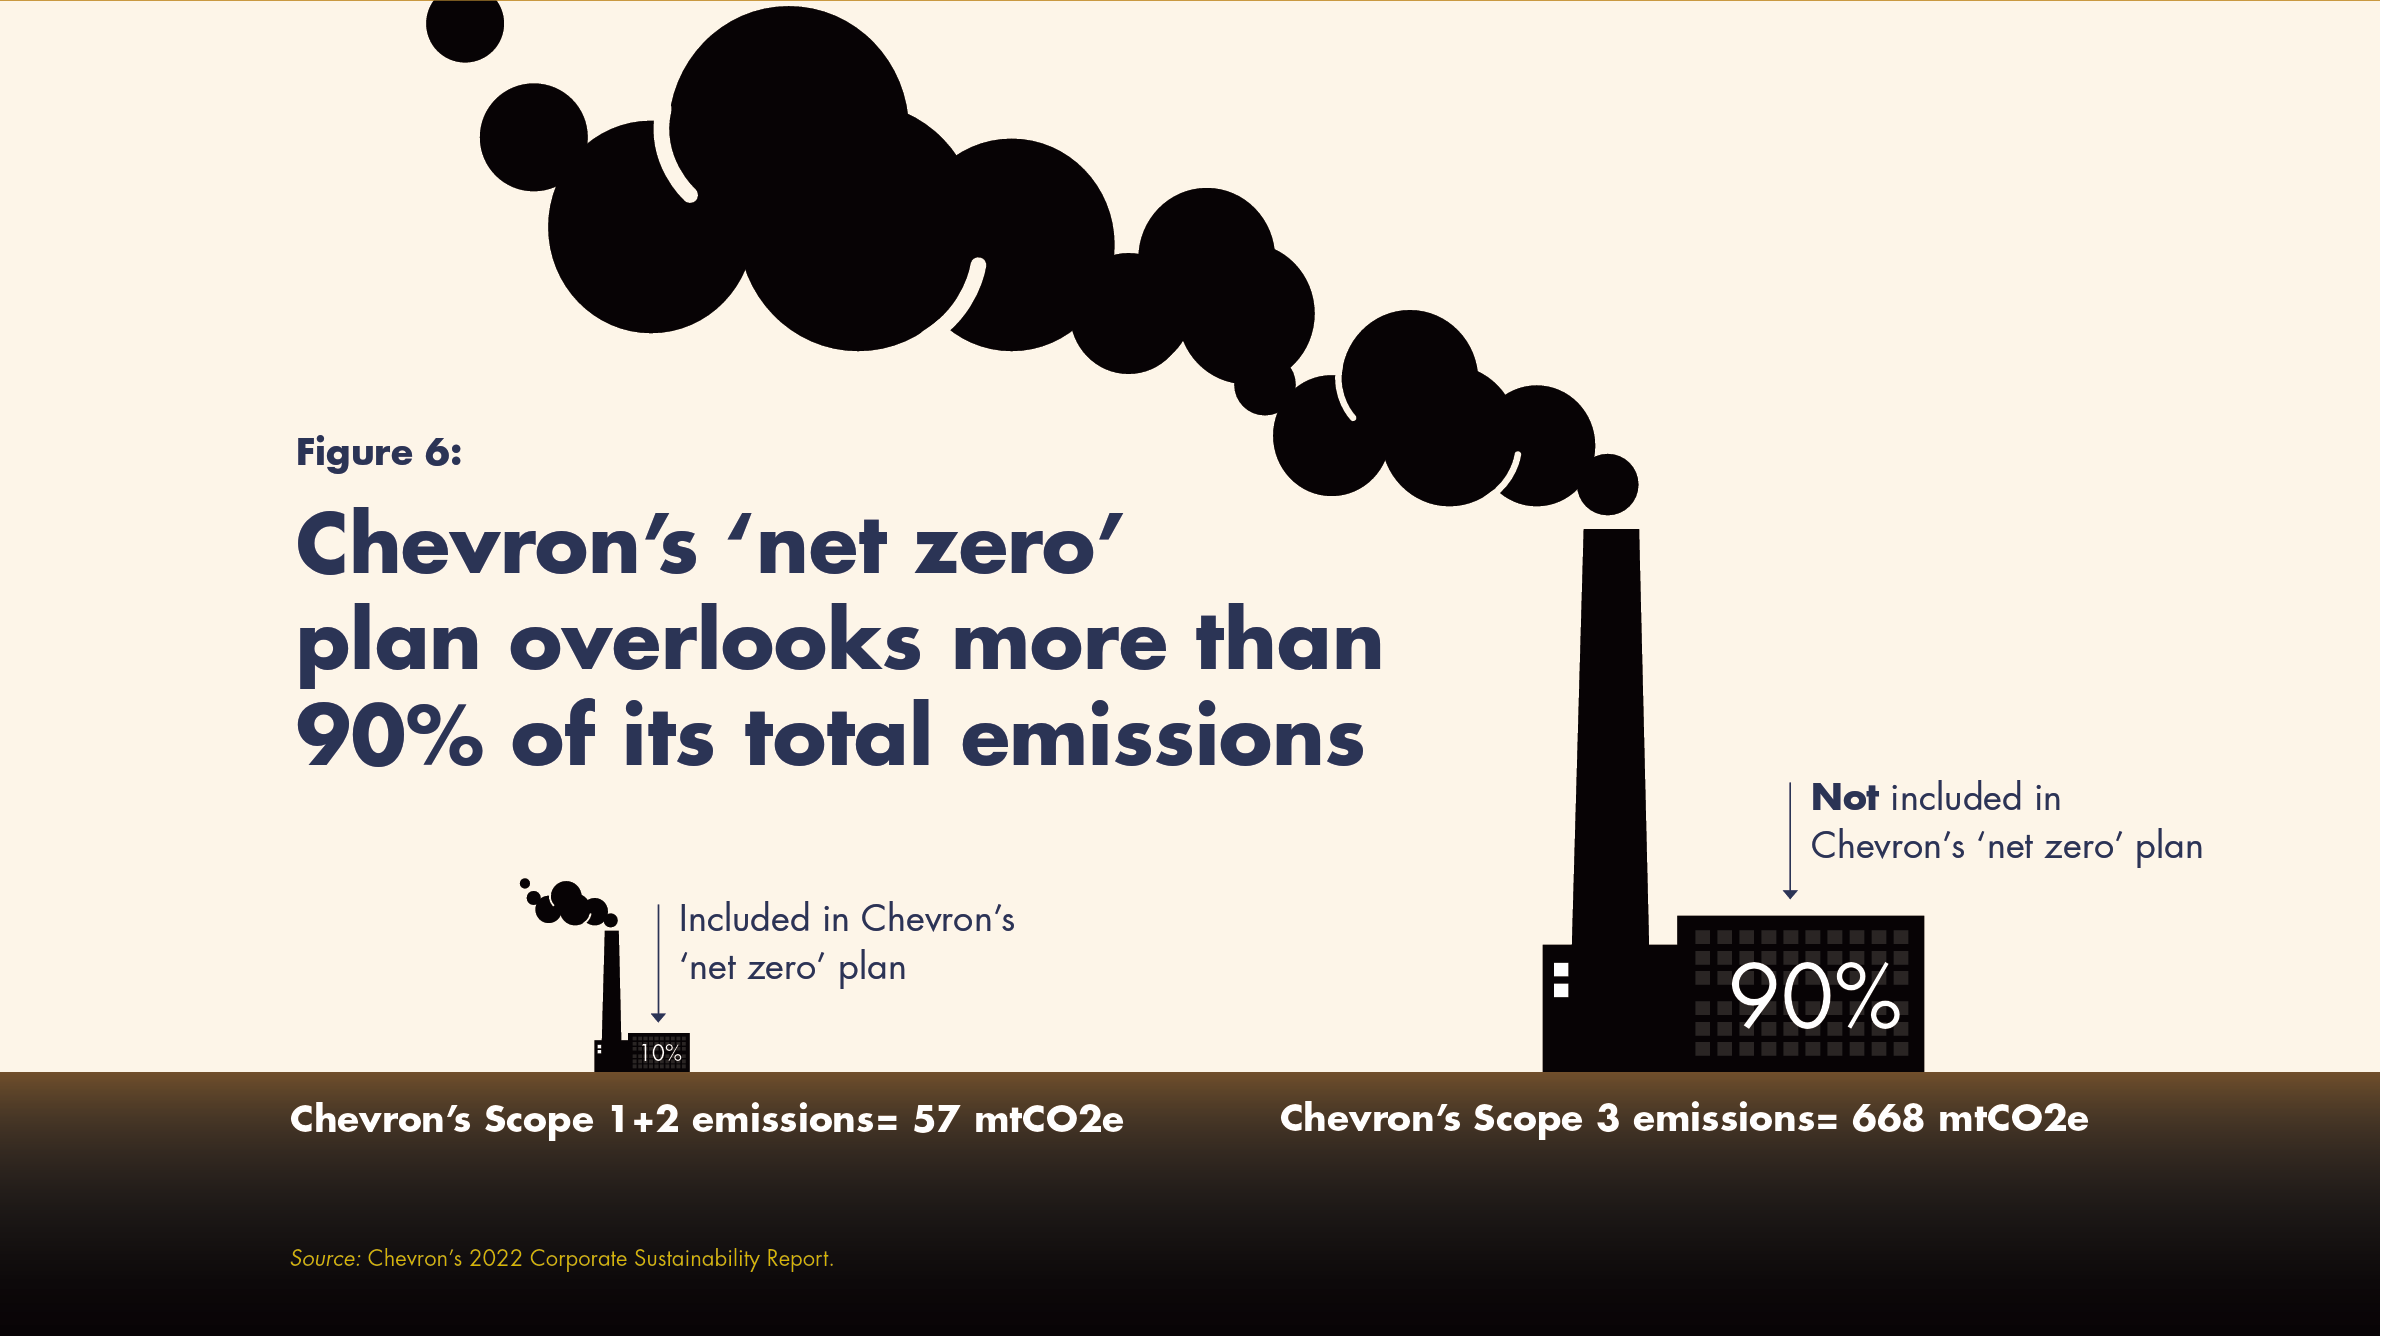 Illustration showing that Chevron omits more than 90 percent of its emissions in its “net zero” “aspiration”. Though Chevron is quick to proffer its “net zero” commitment as proof of its commitment to address climate change, its “net zero” pledge is 1) only an “aspiration”, as carefully stated on its website; and 2) only applies to its Scope 1 emissions (that result from operating the facilities/equipment/vehicles/buildings that Chevron owns) and Scope 2 emissions (produced from the energy Chevron uses), not its Scope 3 emissions (caused by the end-use of Chevron’s products – sold oil and gas). Graphic: Corporate Accountability